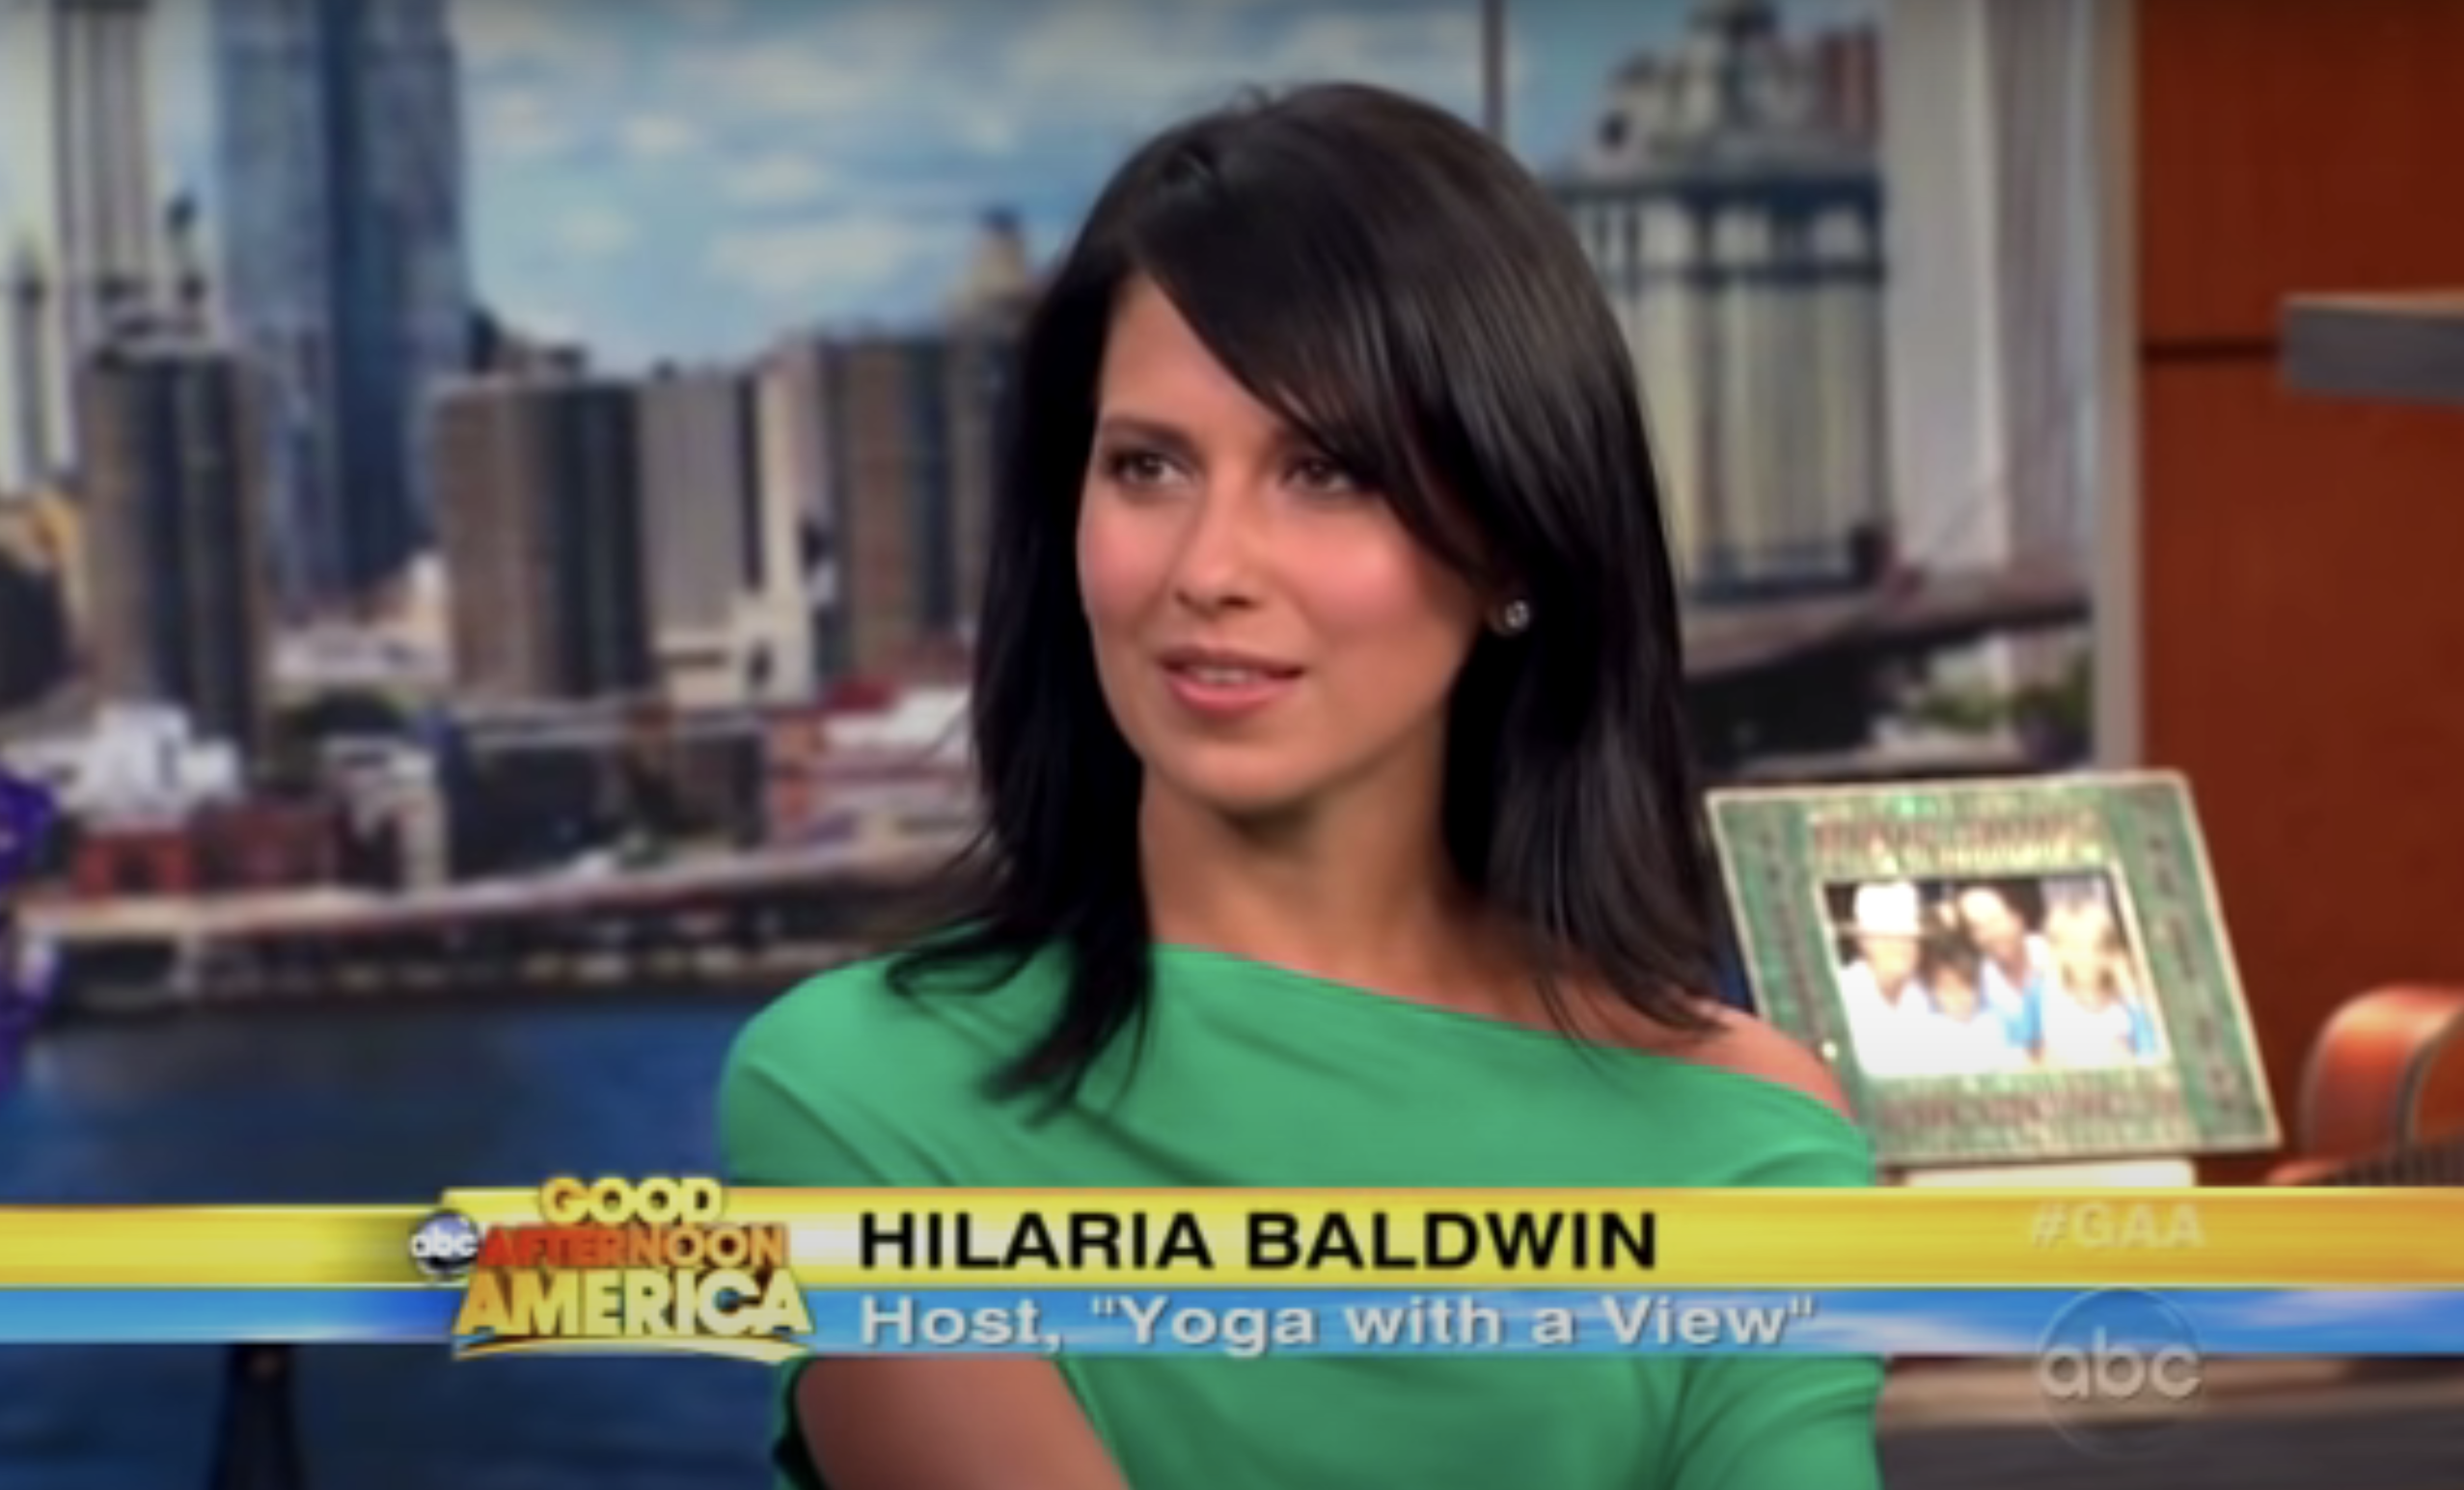 Hilaria Baldwin in a TV interview, wearing a solid green top with cityscape backdrop